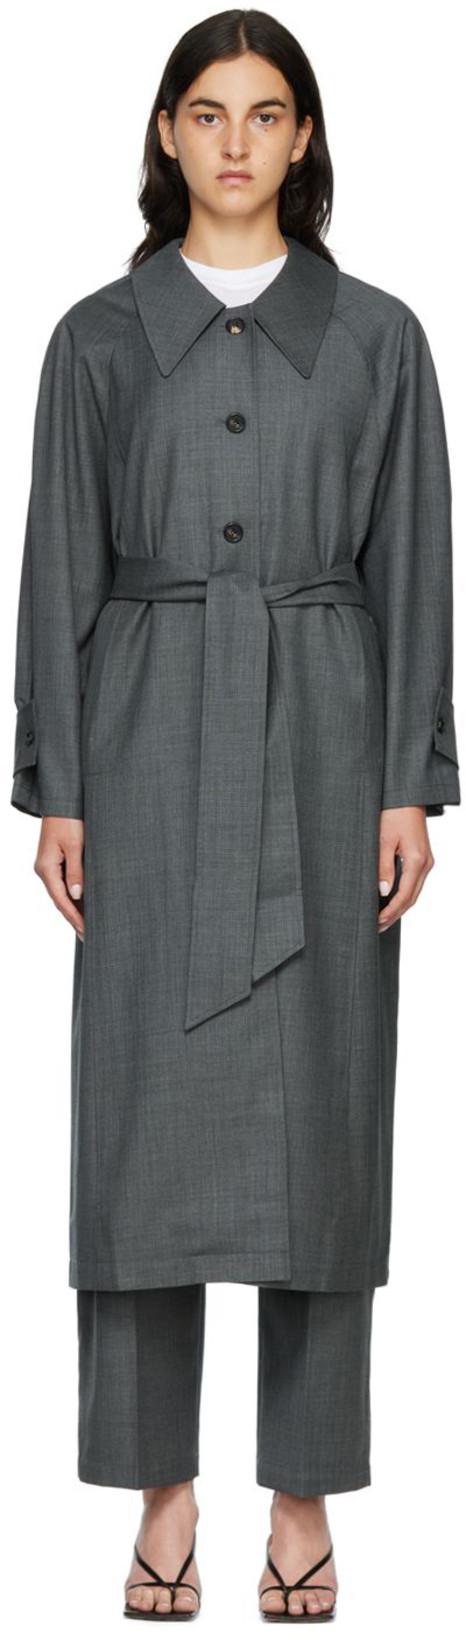 SSENSE Exclusive Gray Buttoned Trench Coat by ARCH THE